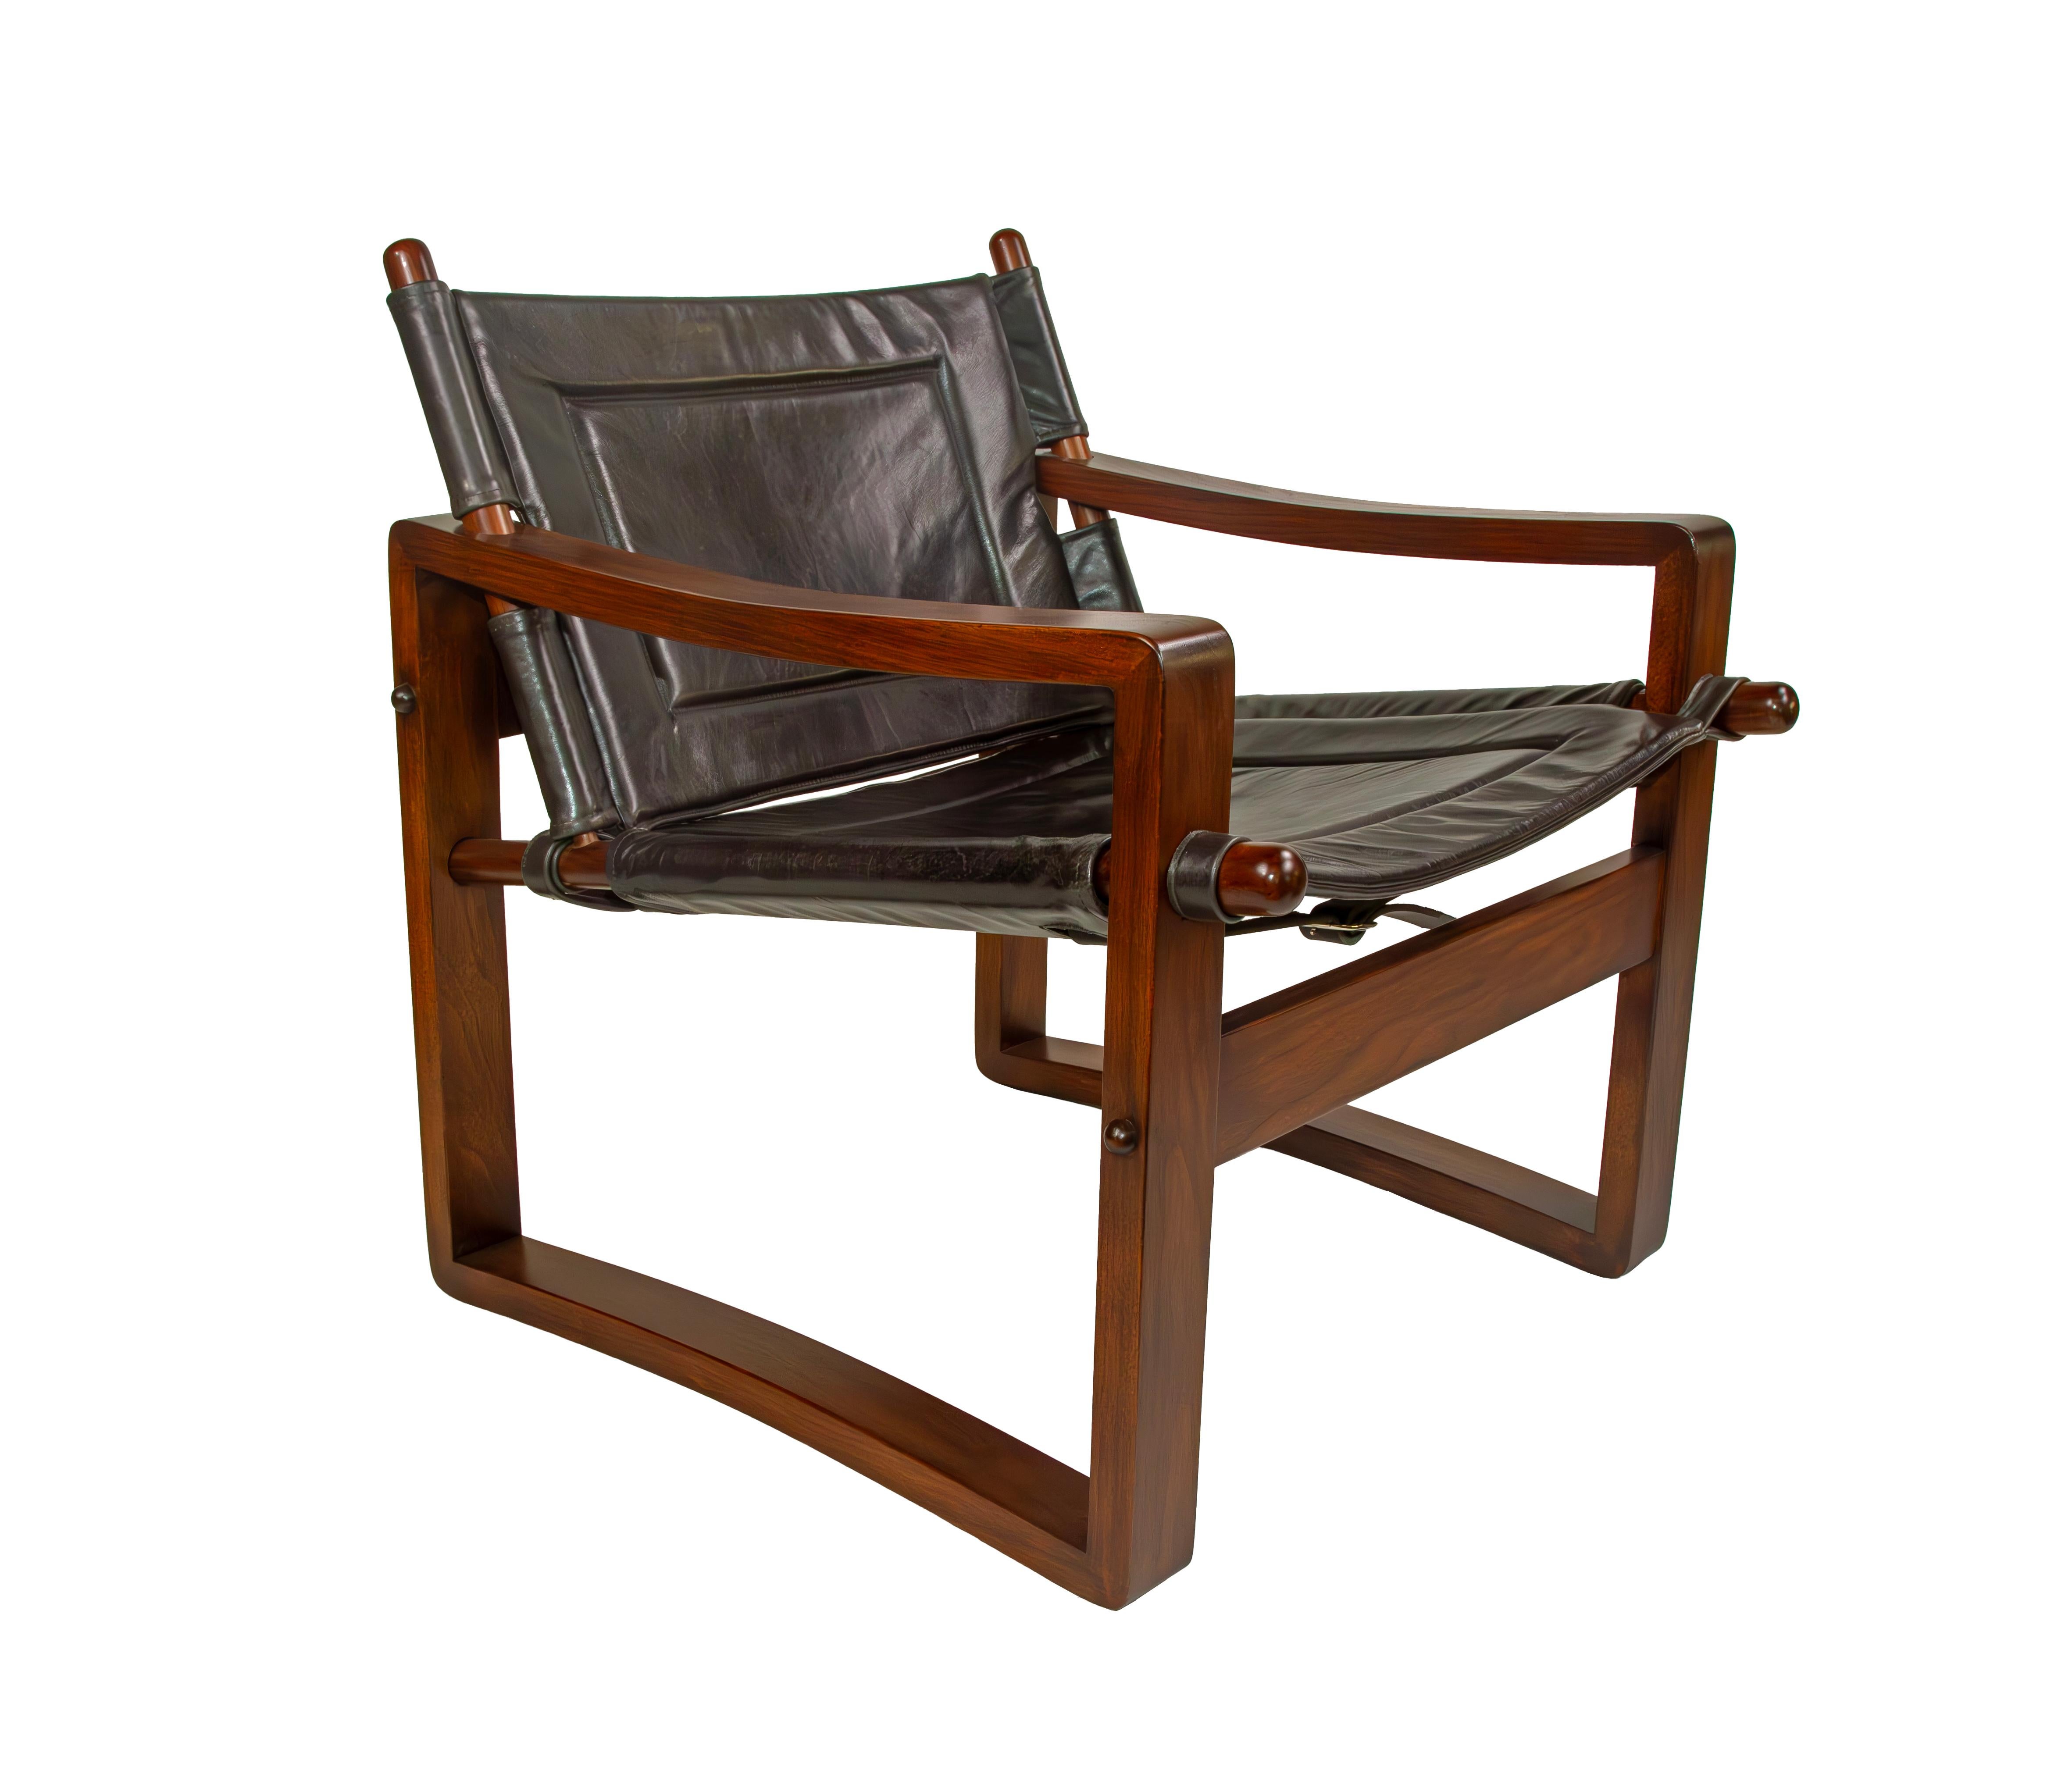 Bleached Walnut Campaign Safari Chair with Leather or Suede Upholstery For Sale 3